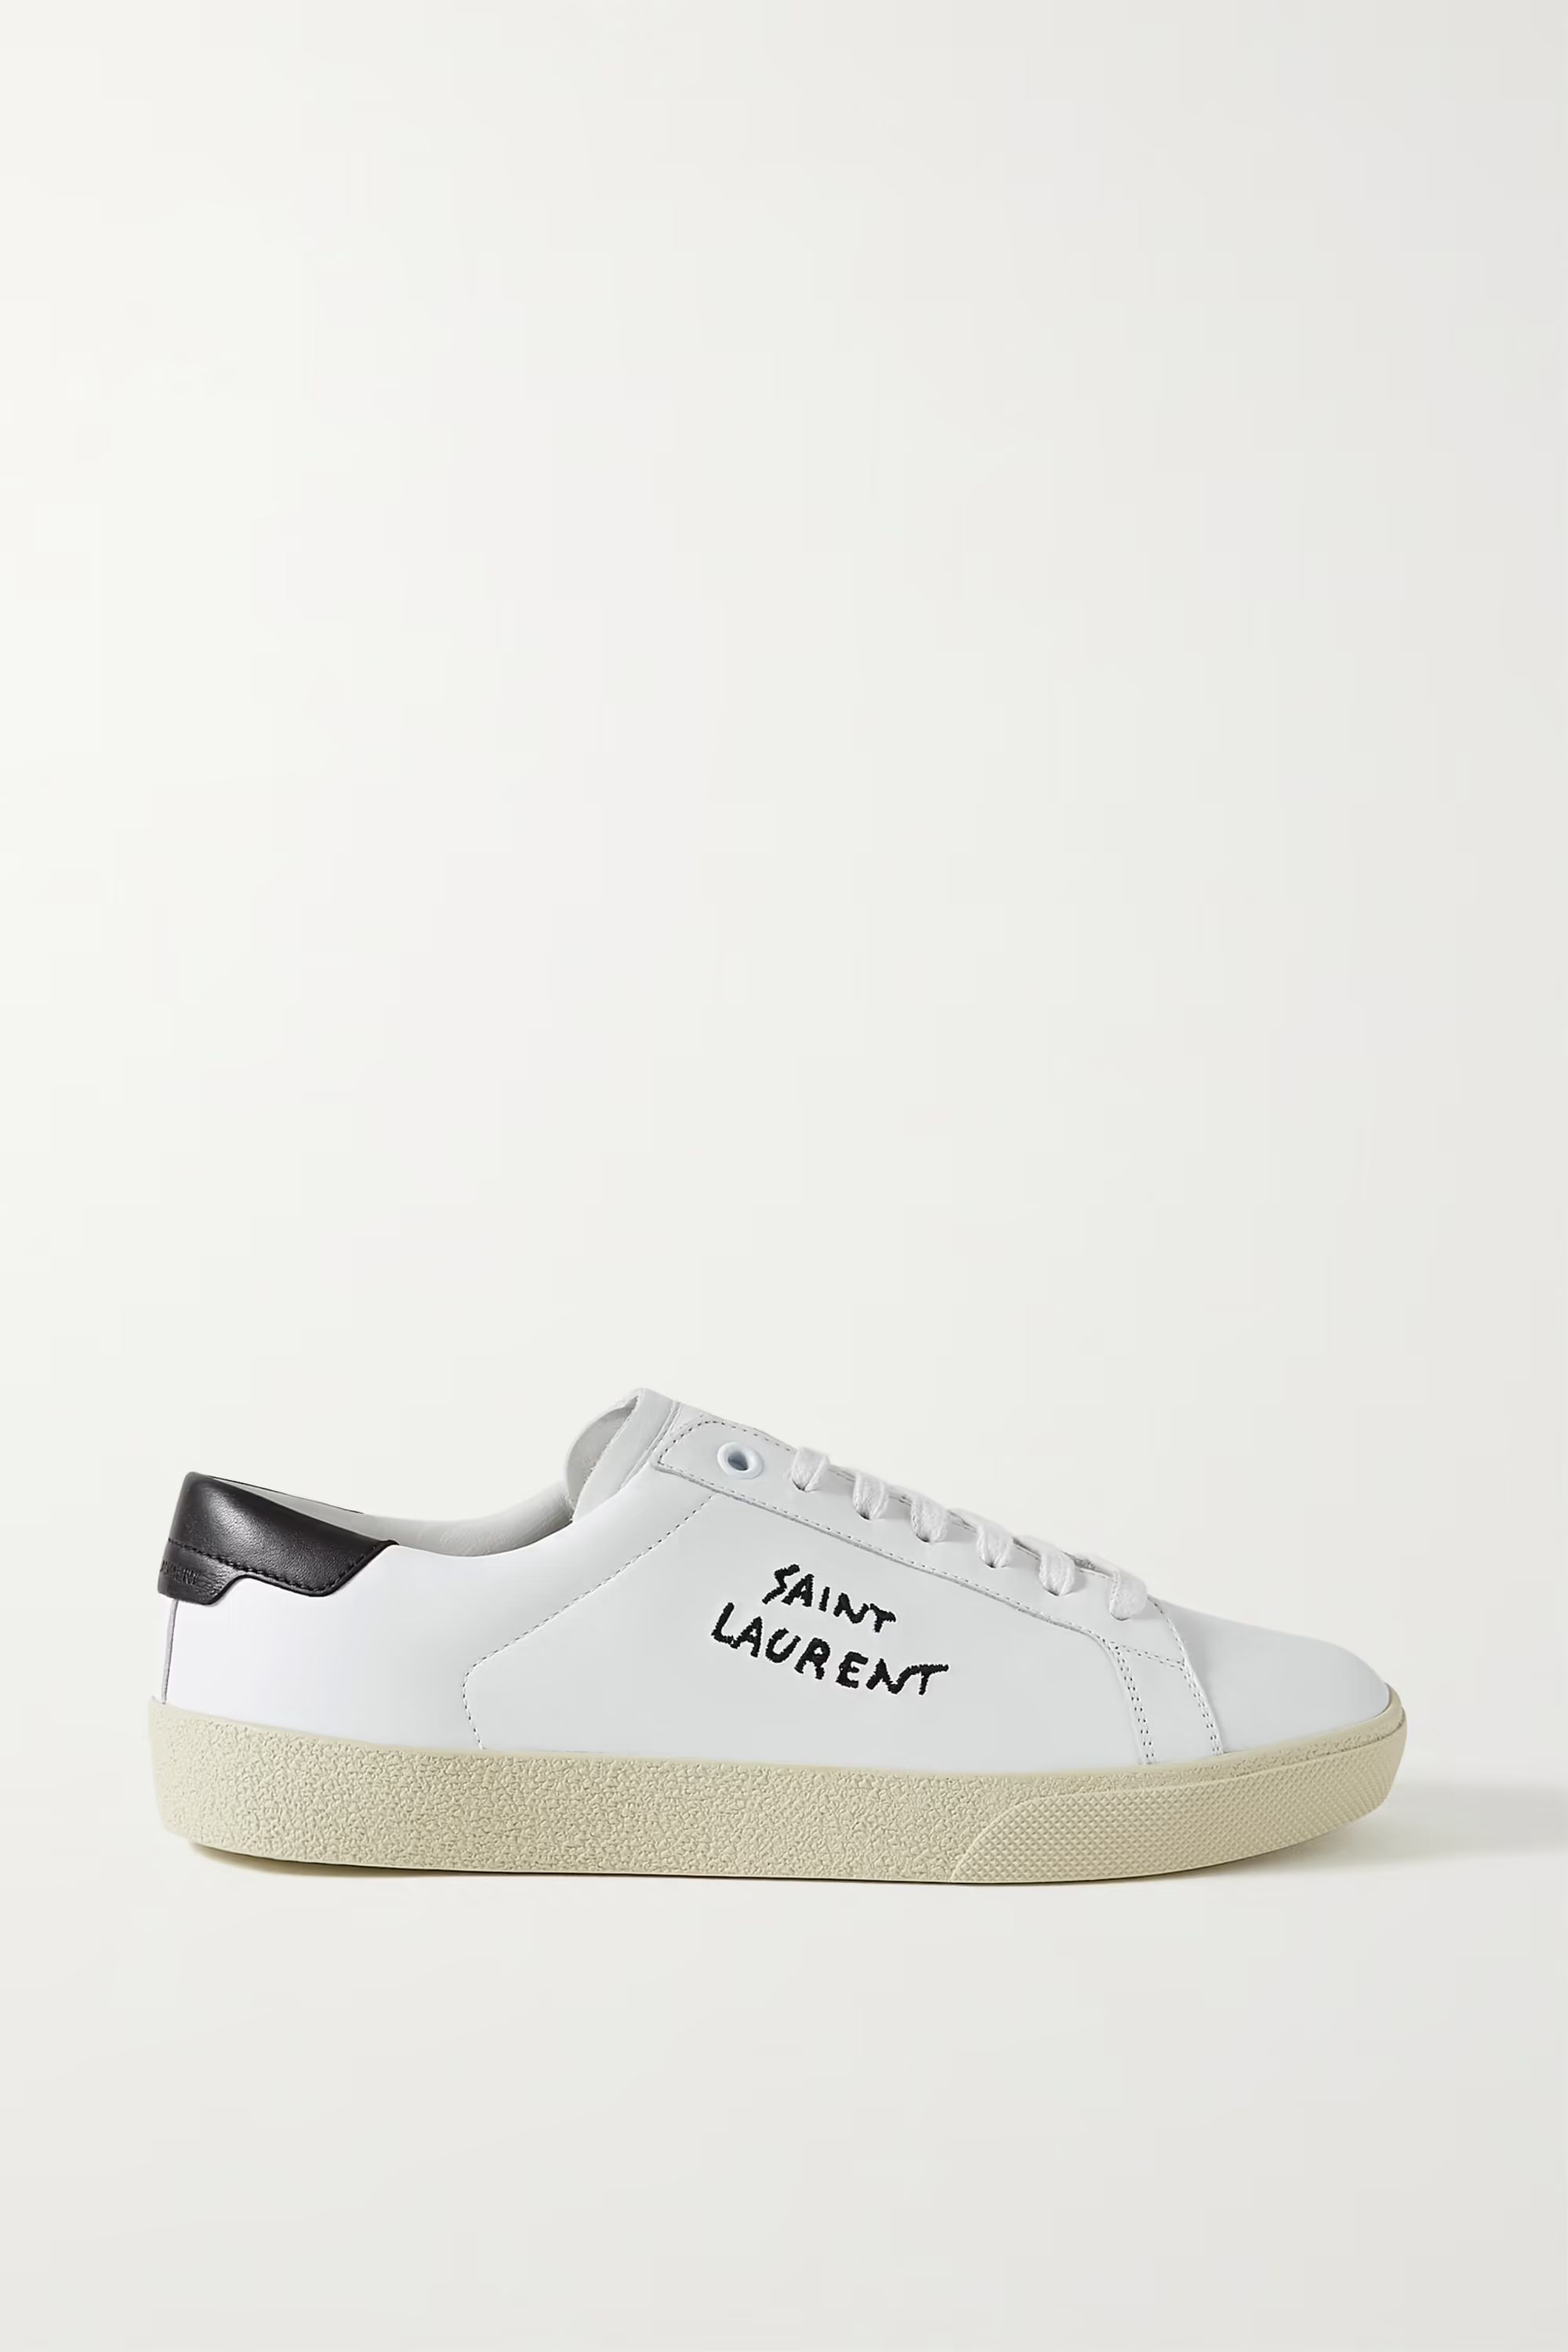 SAINT LAURENTCourt Classic logo-embroidered leather sneakers | NET-A-PORTER (US)